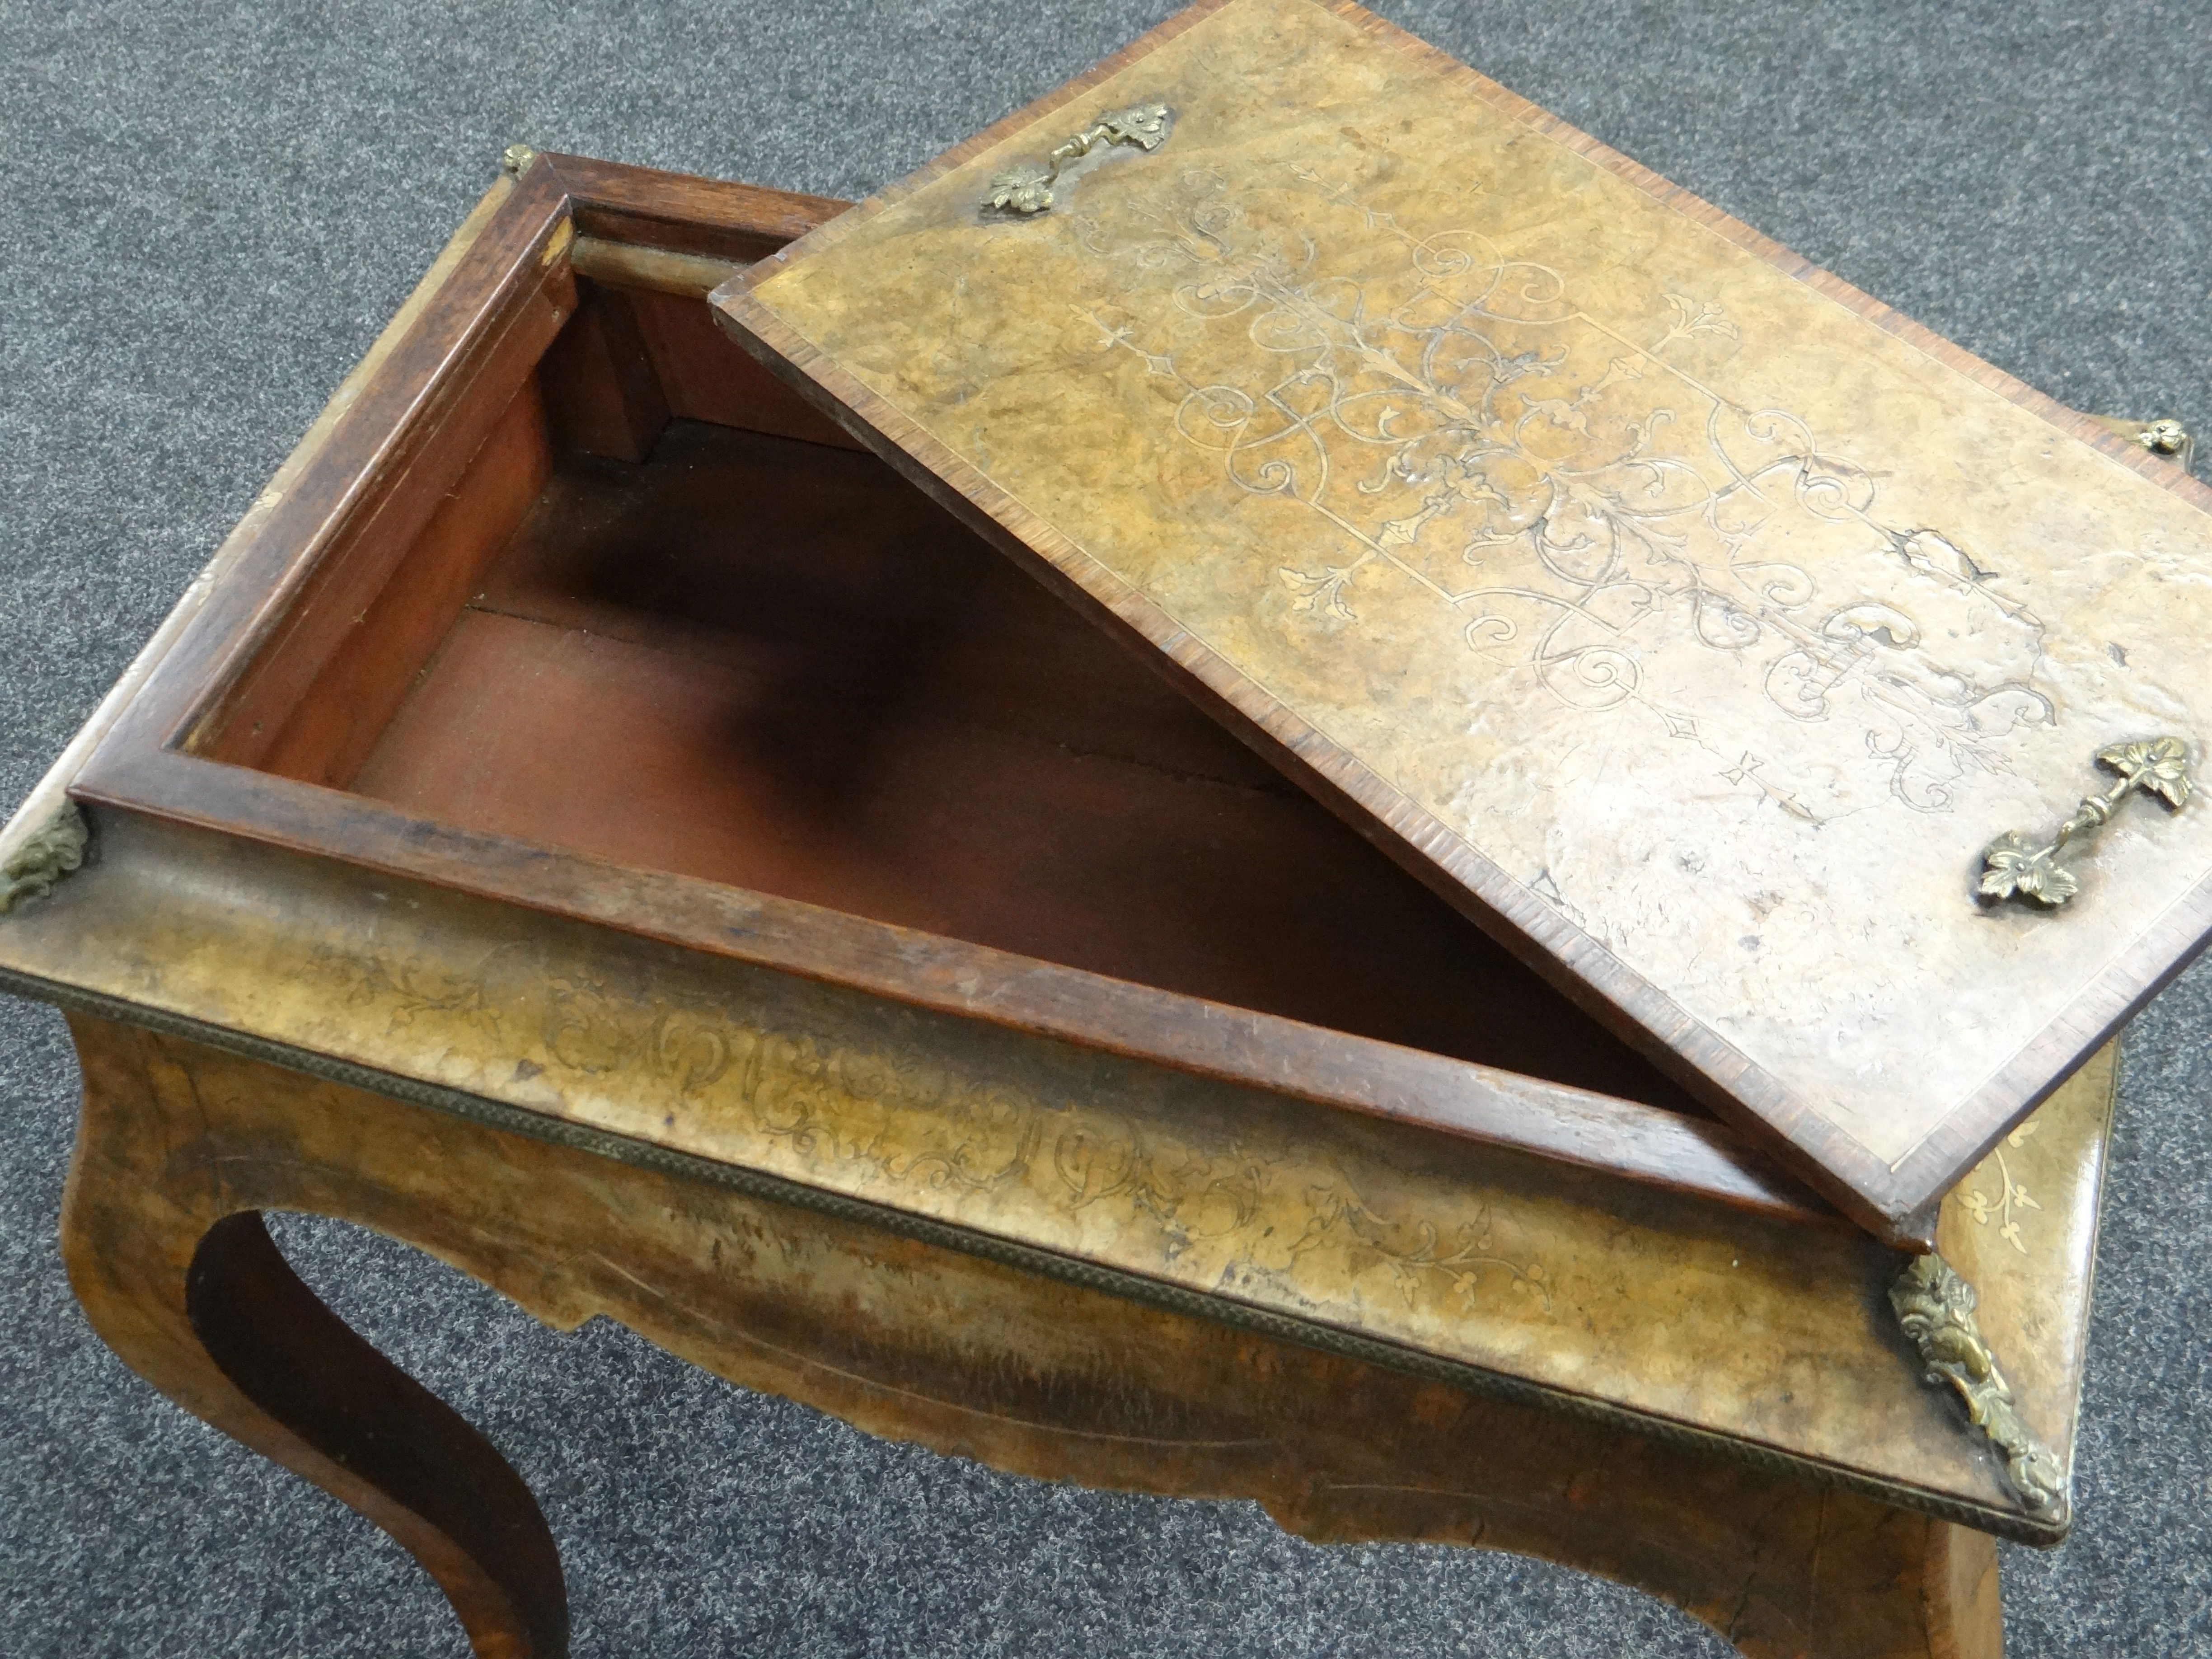 A NINETEENTH CENTURY MARQUETRY WALNUT SEWING TABLE with ormolu fittings and on shaped legs ( - Image 3 of 3